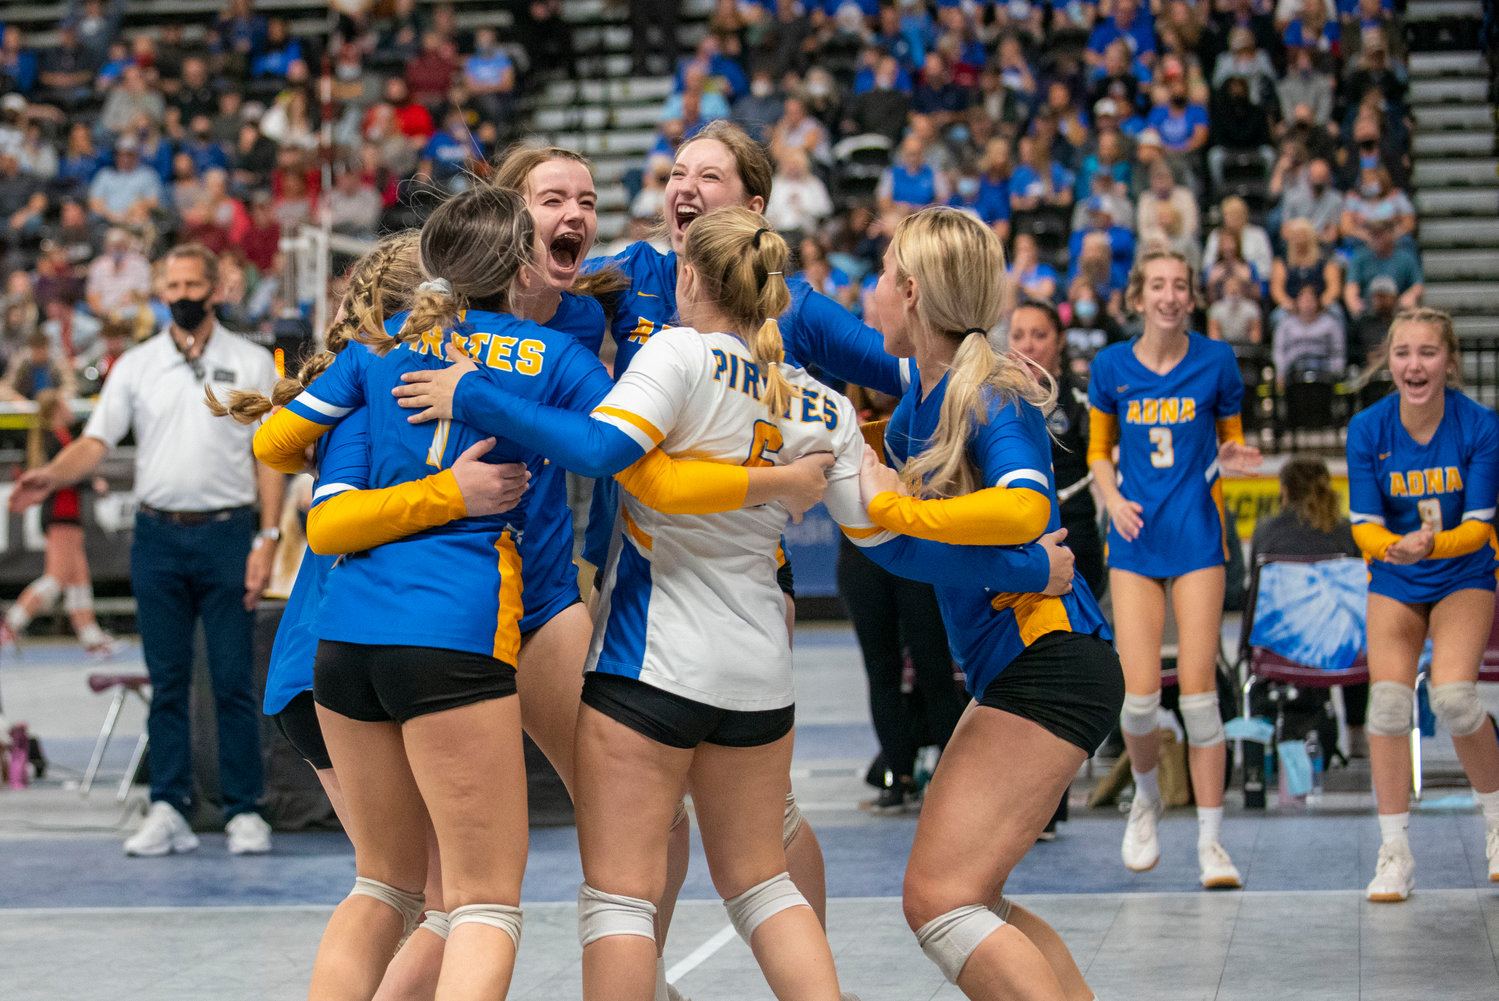 Adna celebrates after defeating Lind-Ritzville/Sprague to move on to the 7th/8th-place match on Friday in Yakima.